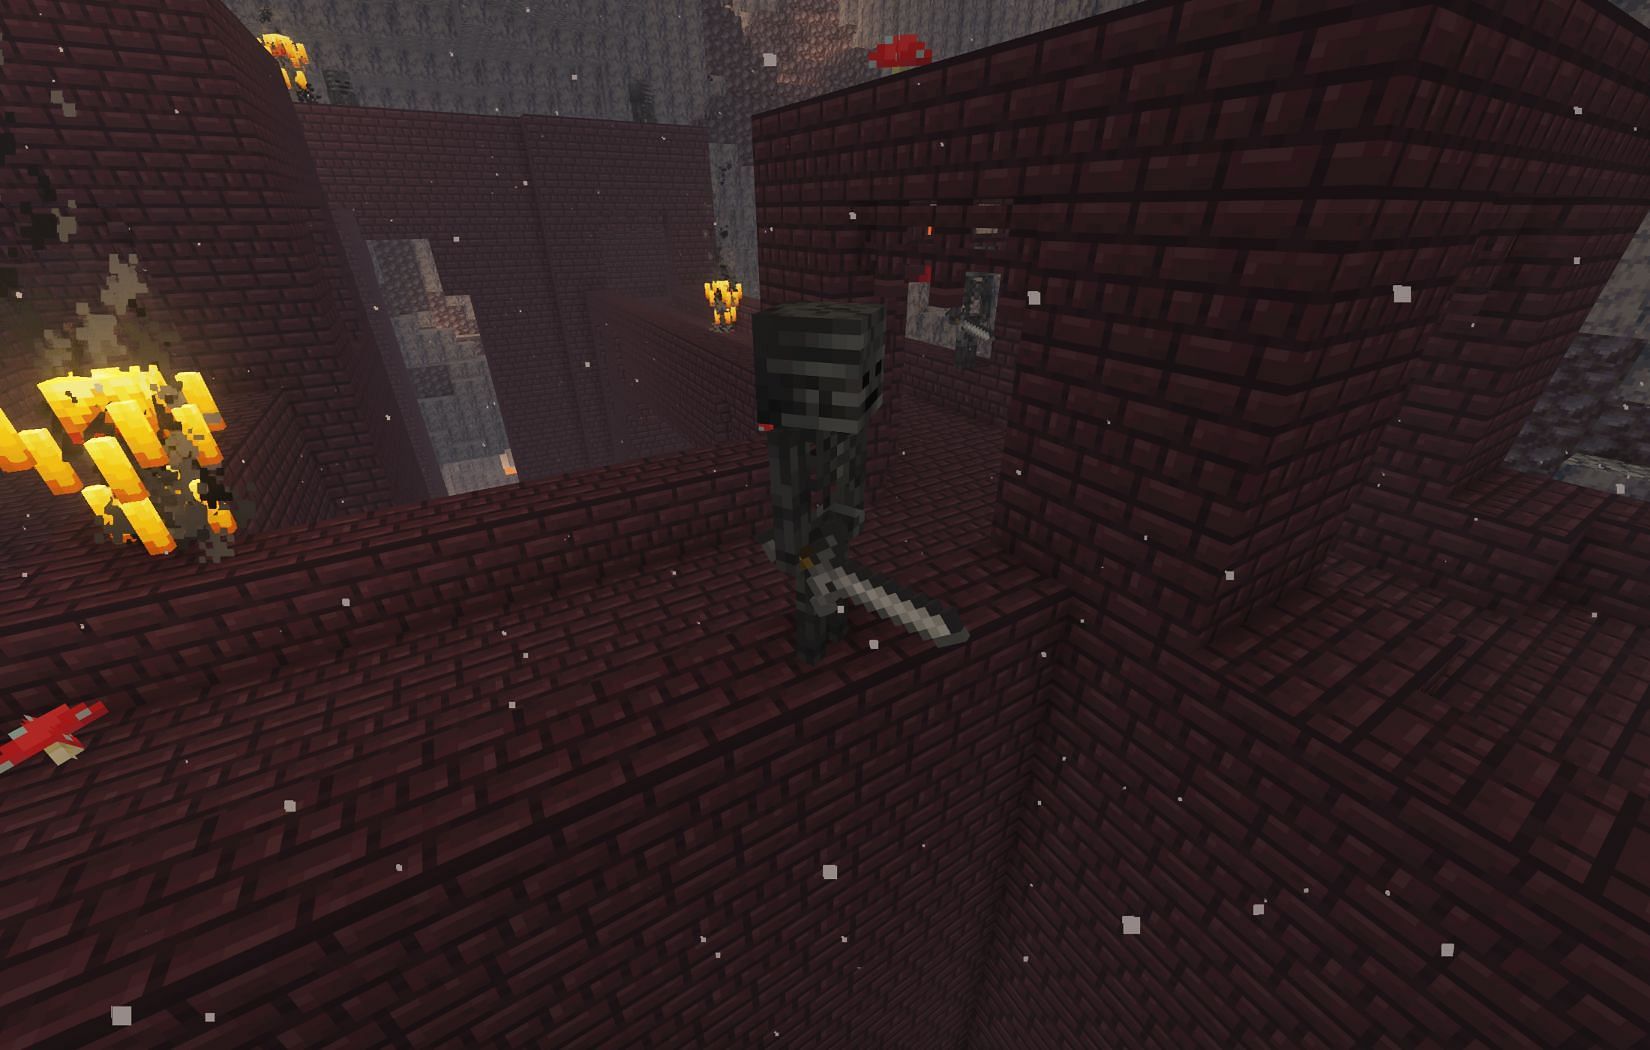 Be wary of hostile mobs on Nether fortress (Image via Mojang)